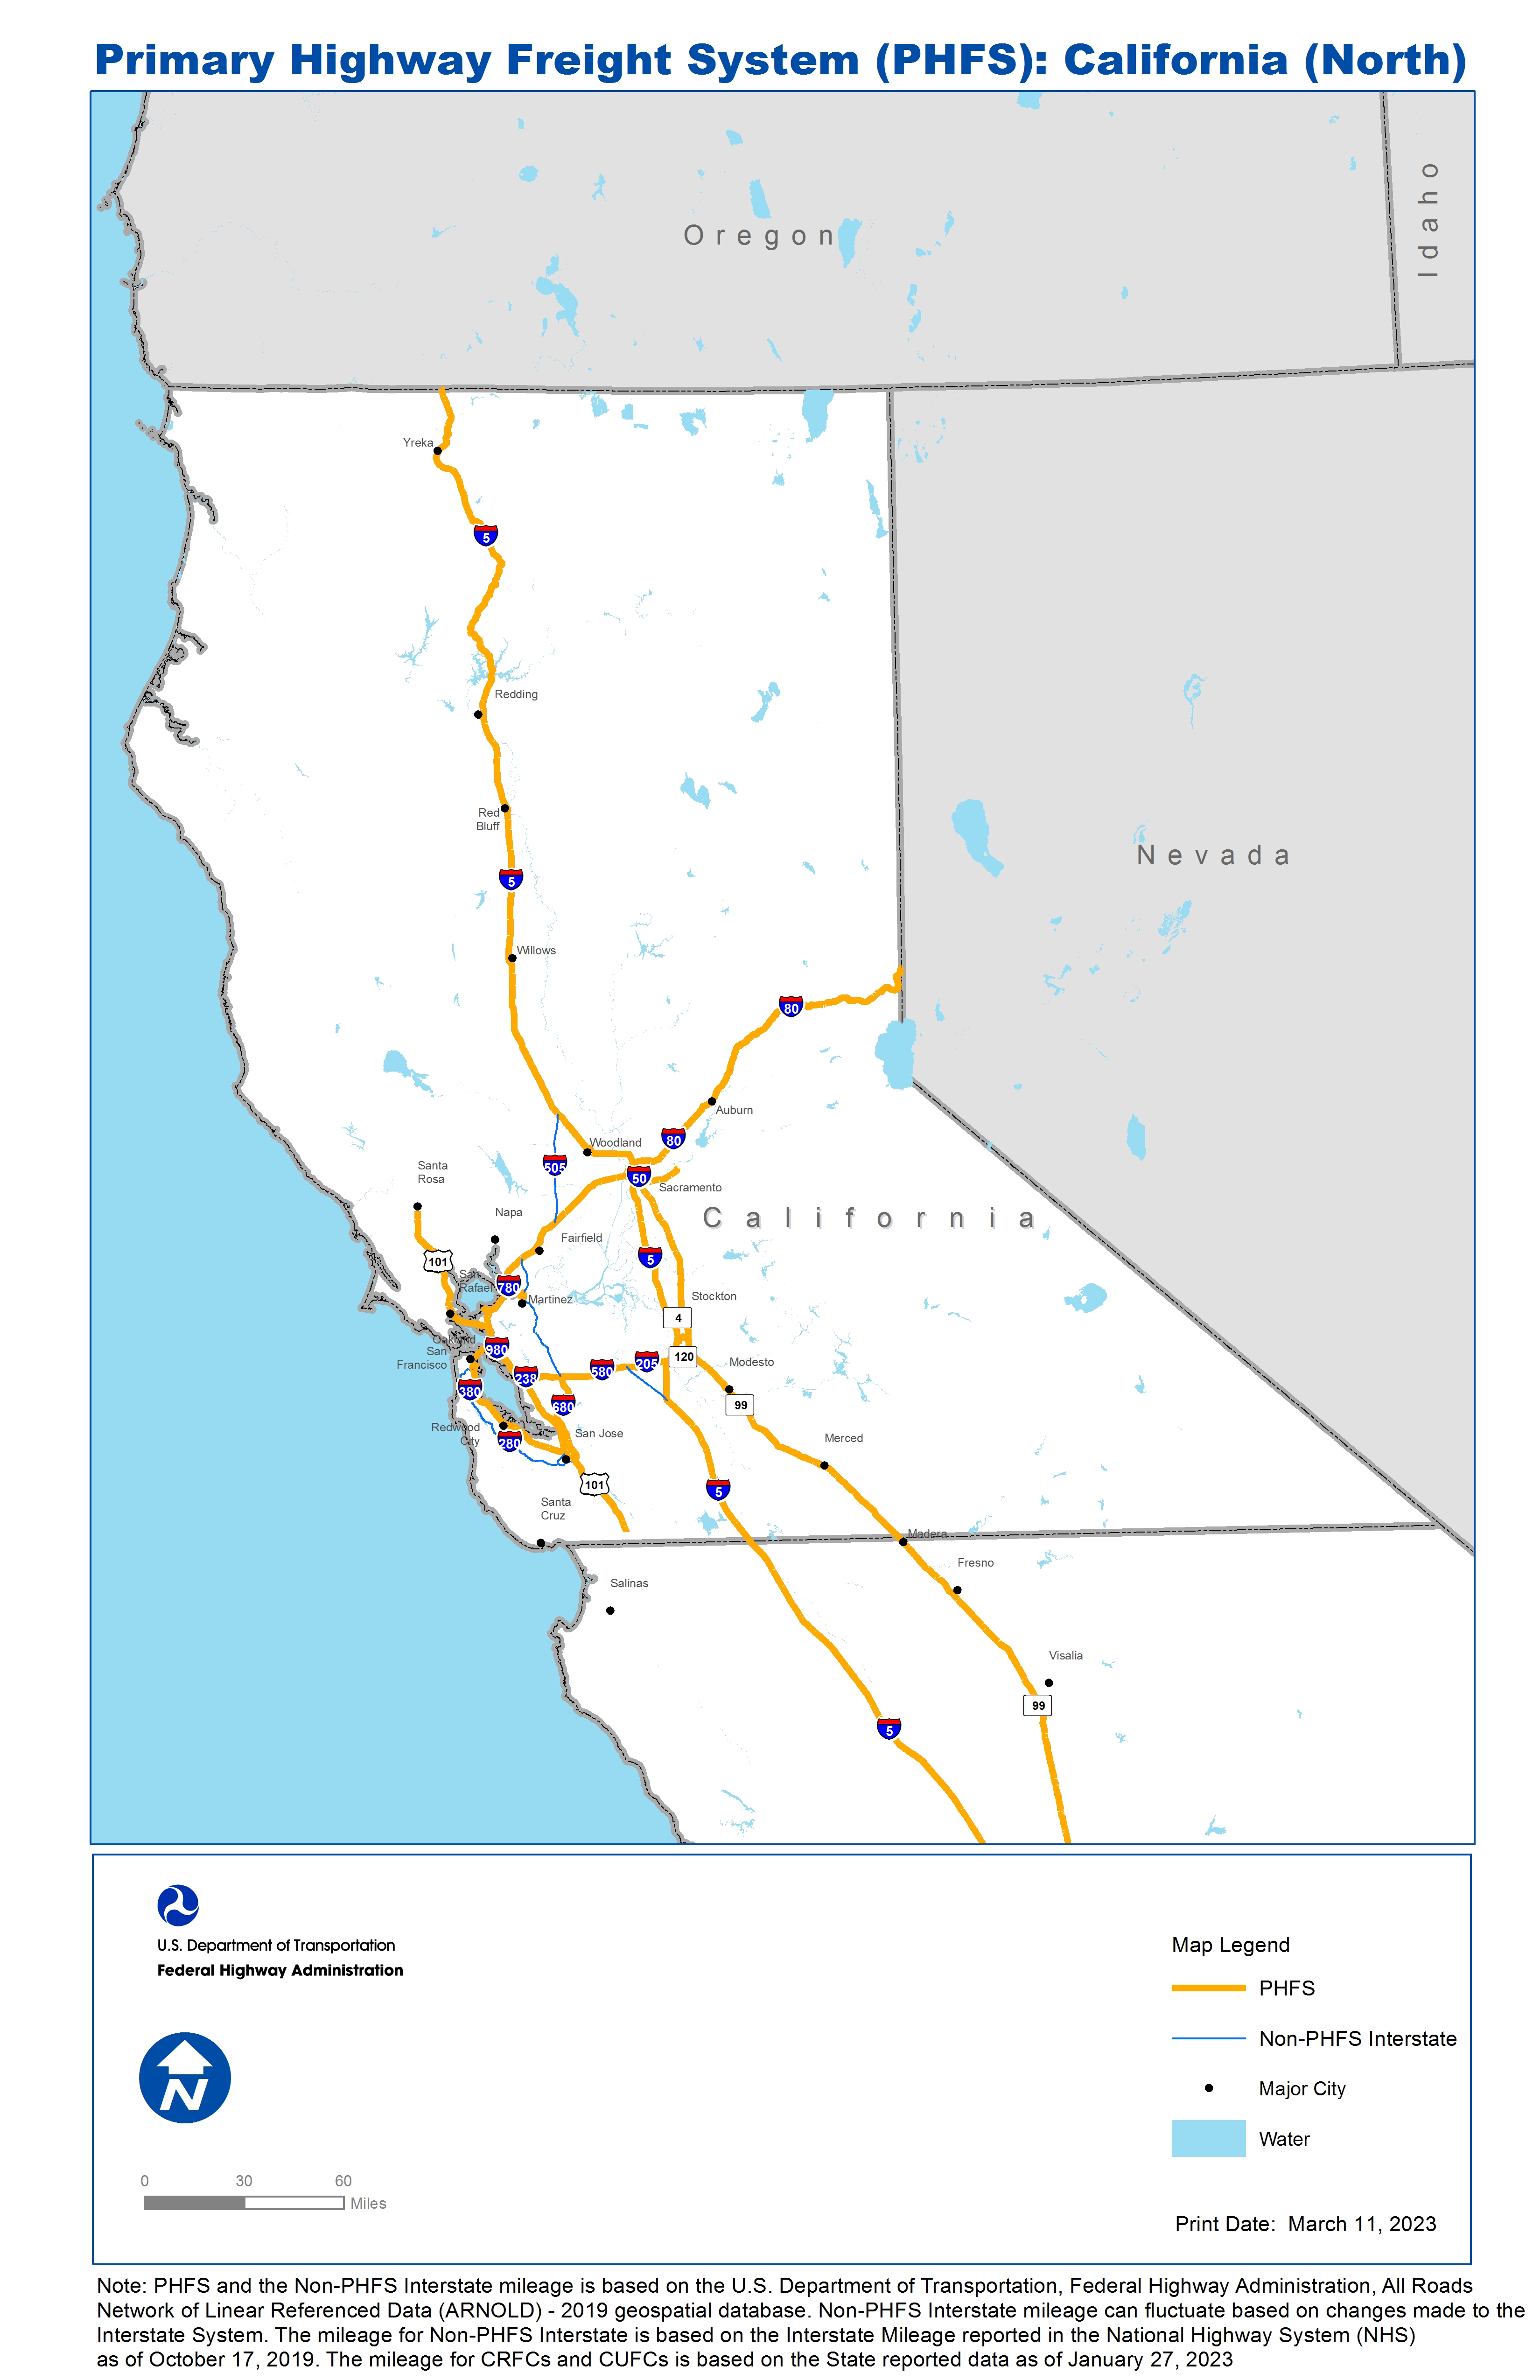 This map of northern California's National Highway Freight Network includes the Primary Highway Freight System and all the Interstates running through the state that are not part of the Primary Highway Freight System.